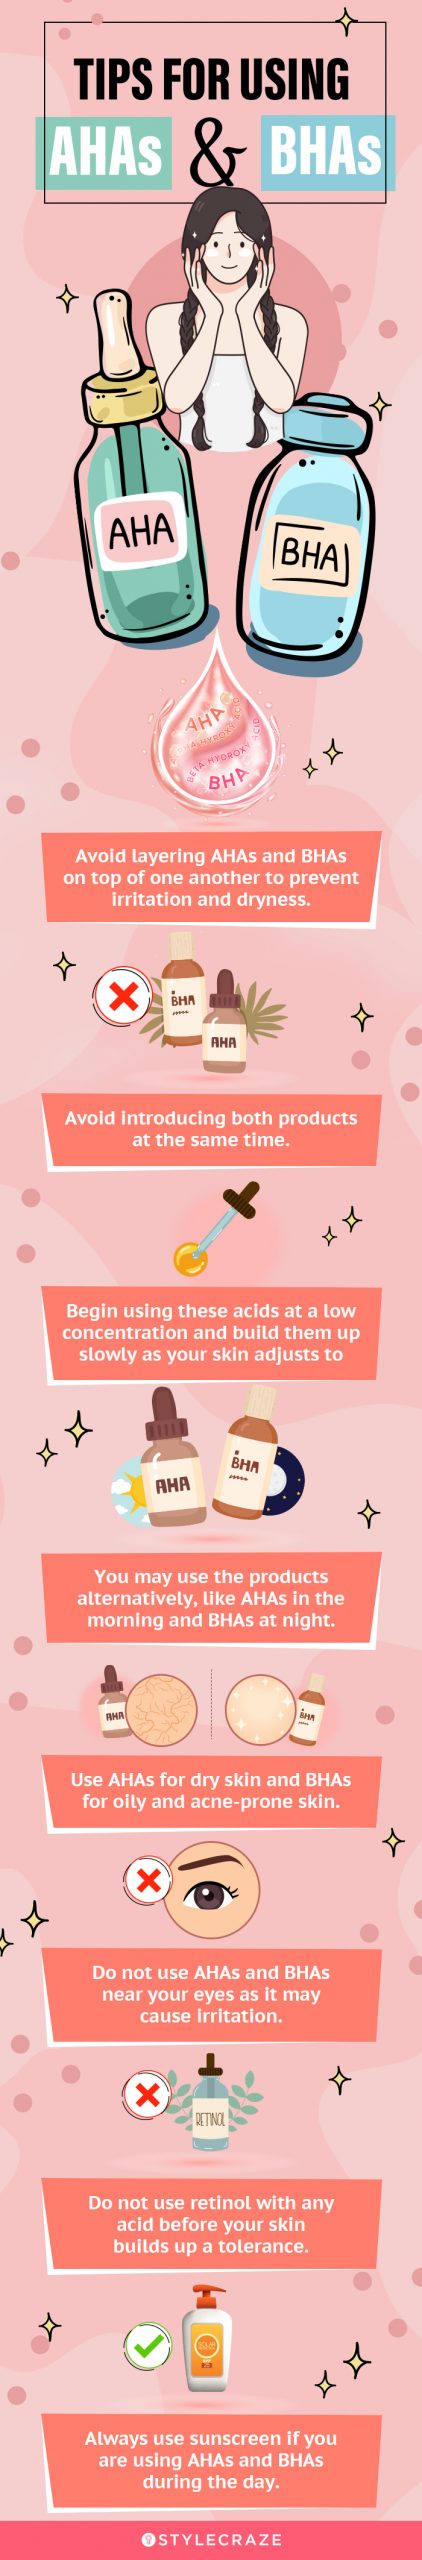 tips for using AHAs and BHAs [infographic]